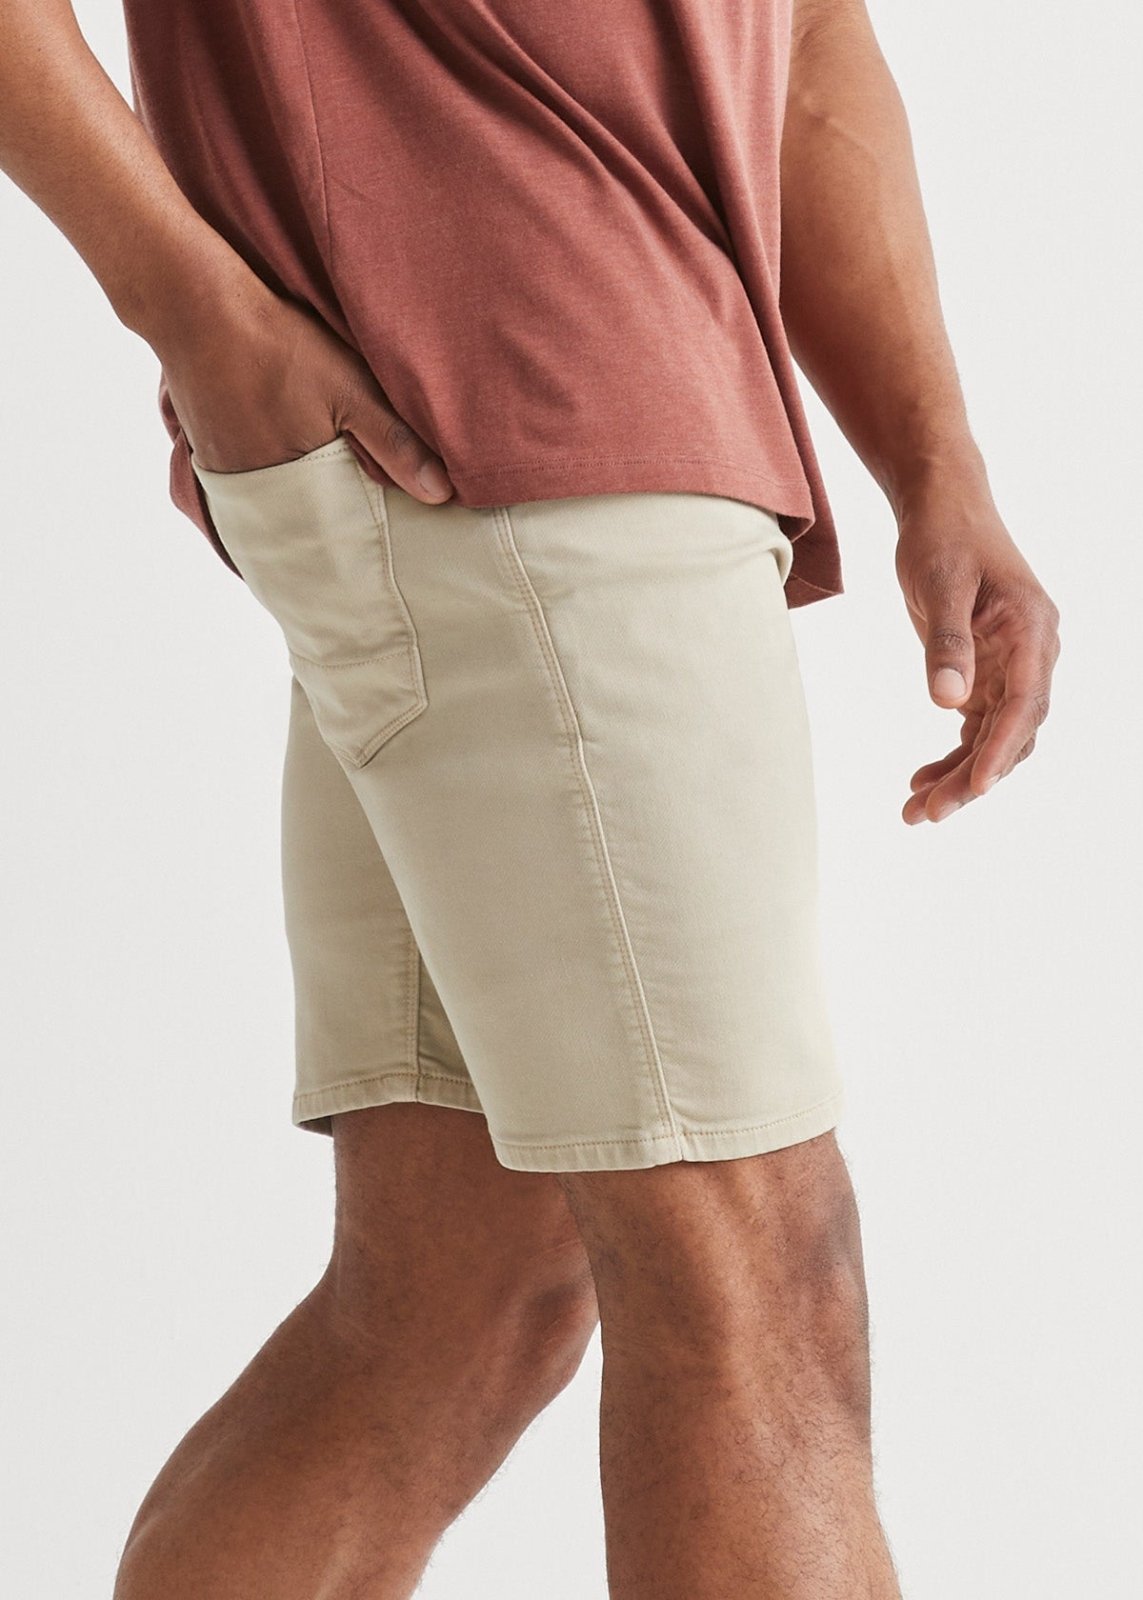 mens off-white slim fit performance short side with hand in back pocket